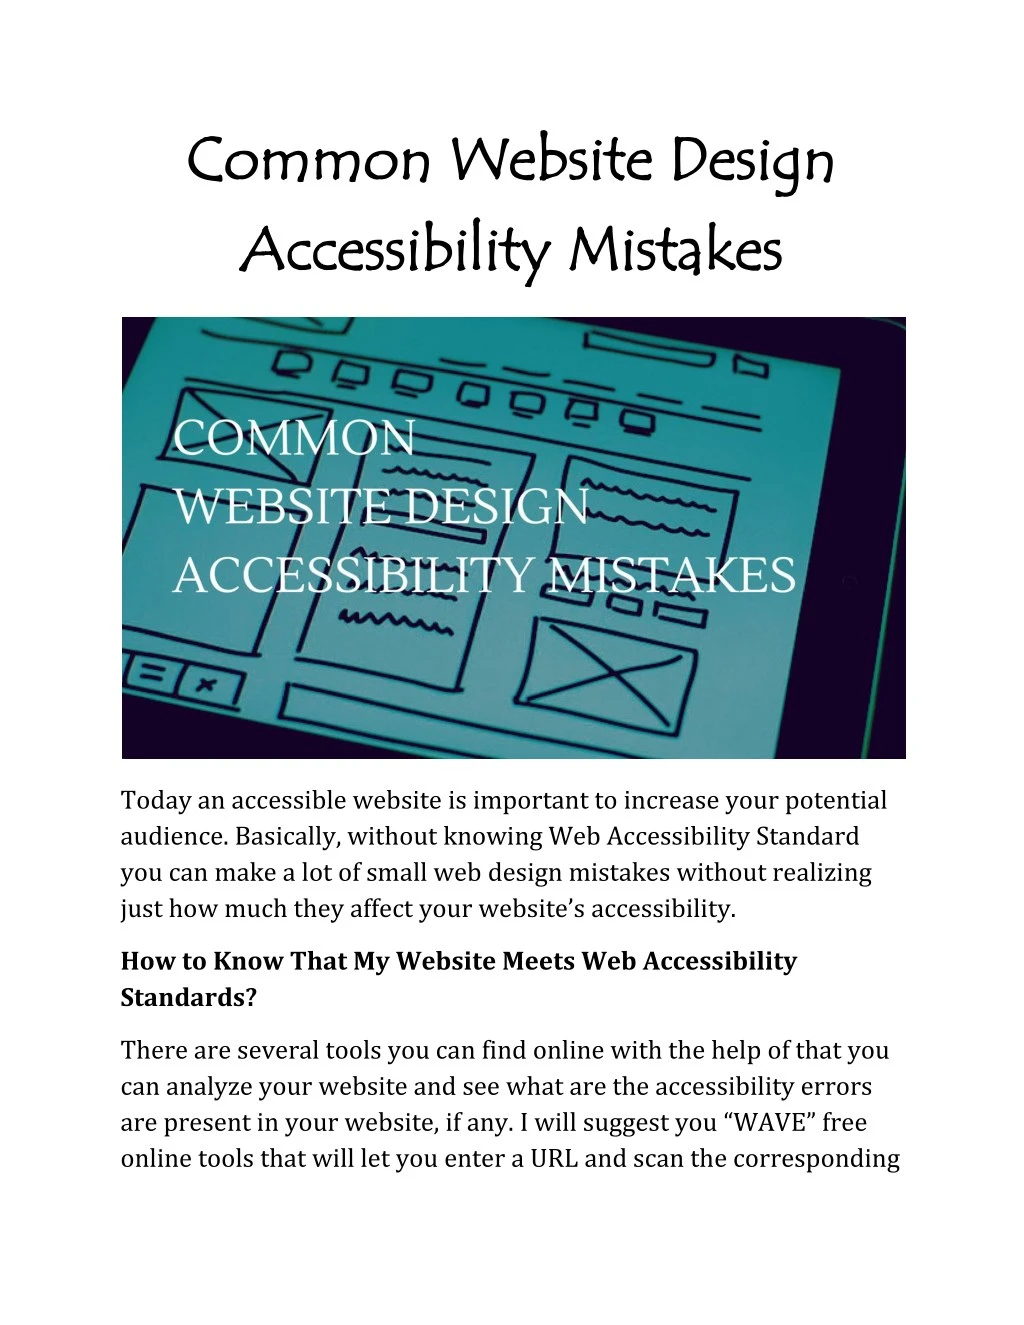 common common website accessibility accessibility